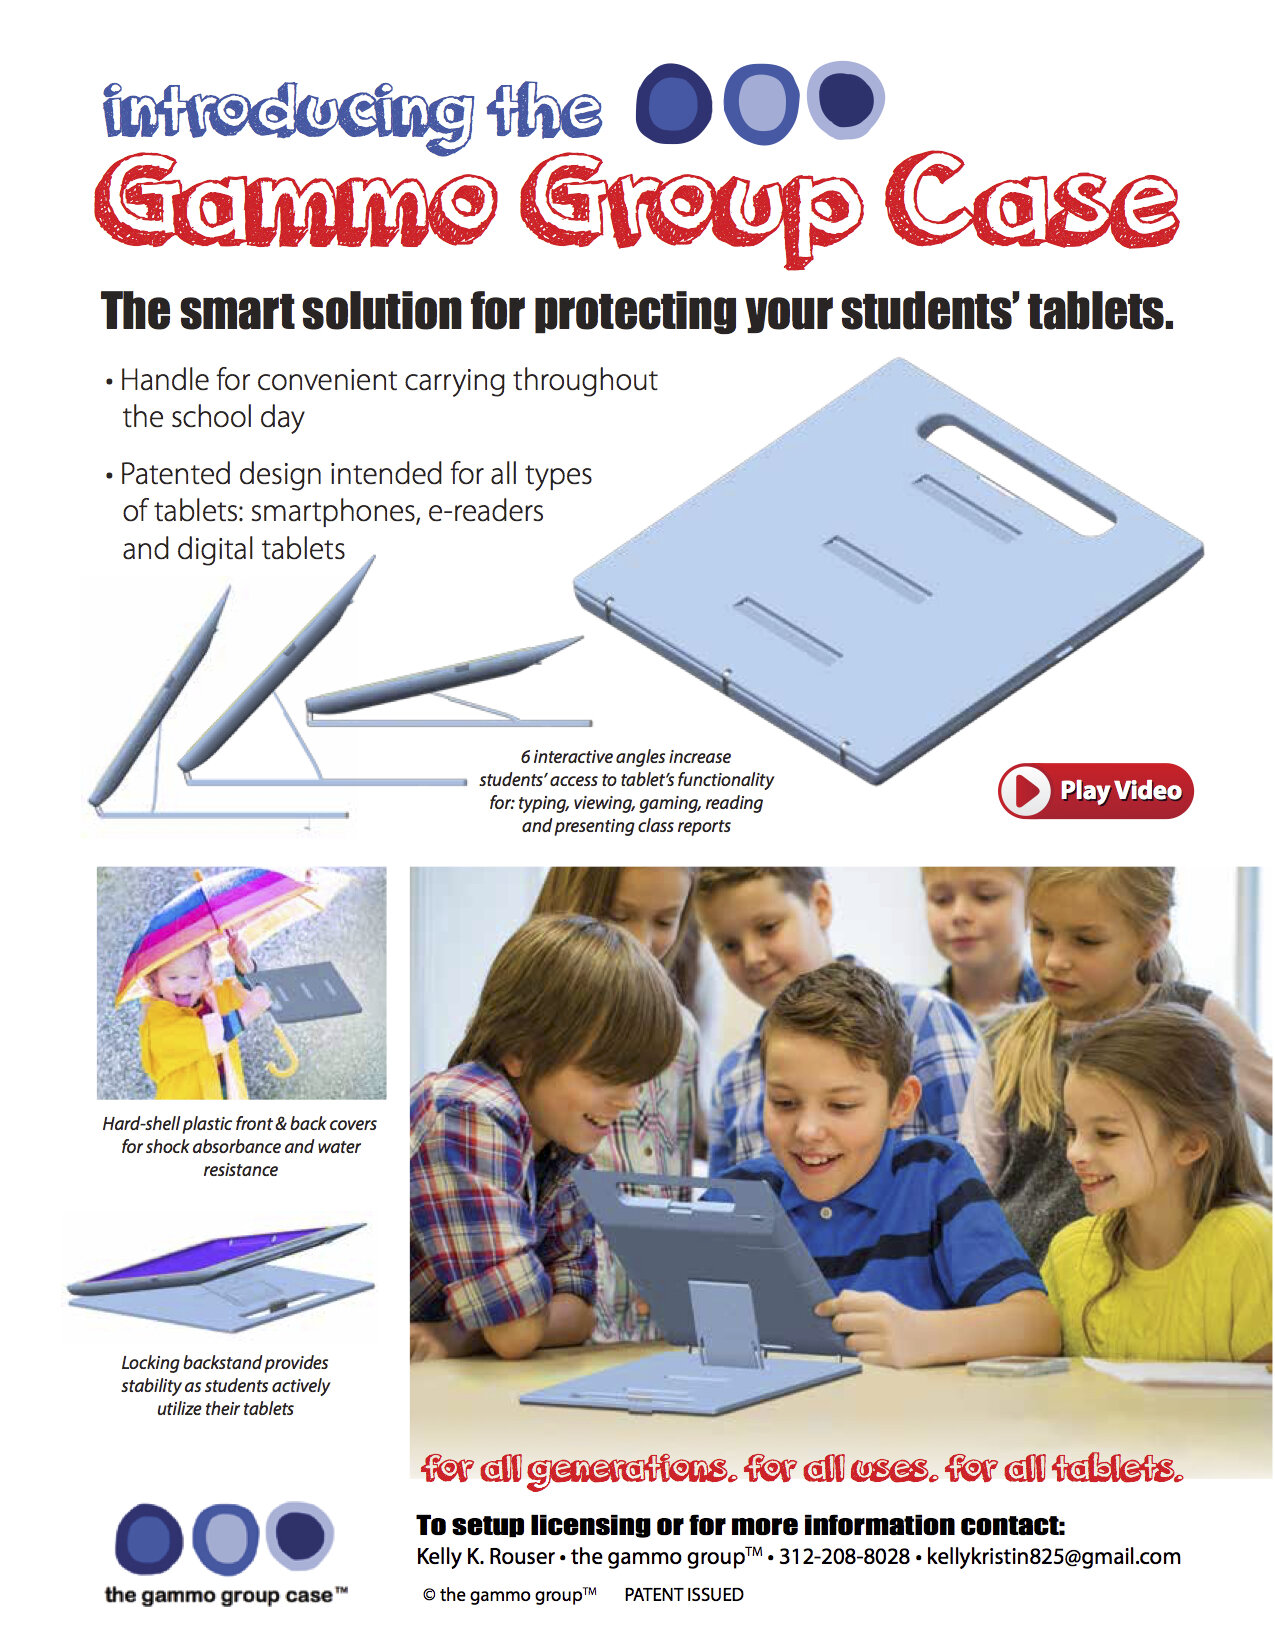 Sell Sheet for The Gammo Group Case